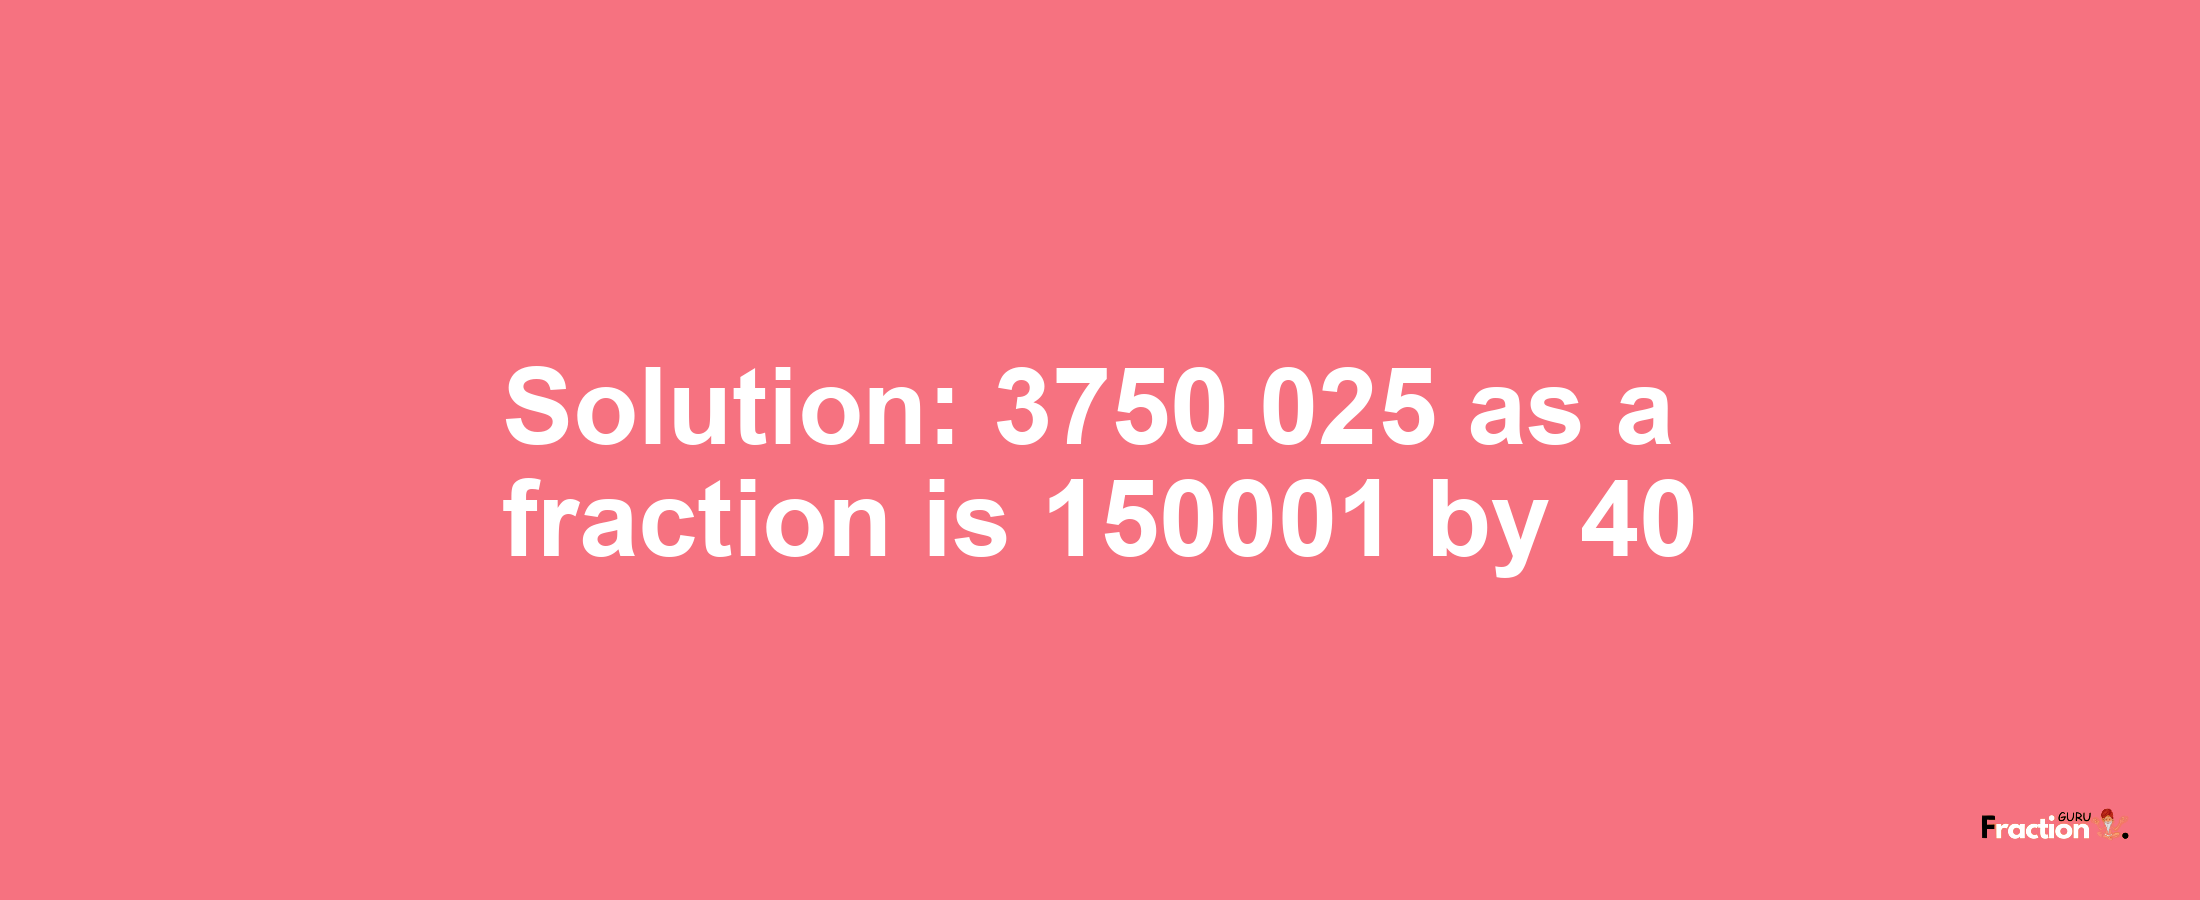 Solution:3750.025 as a fraction is 150001/40